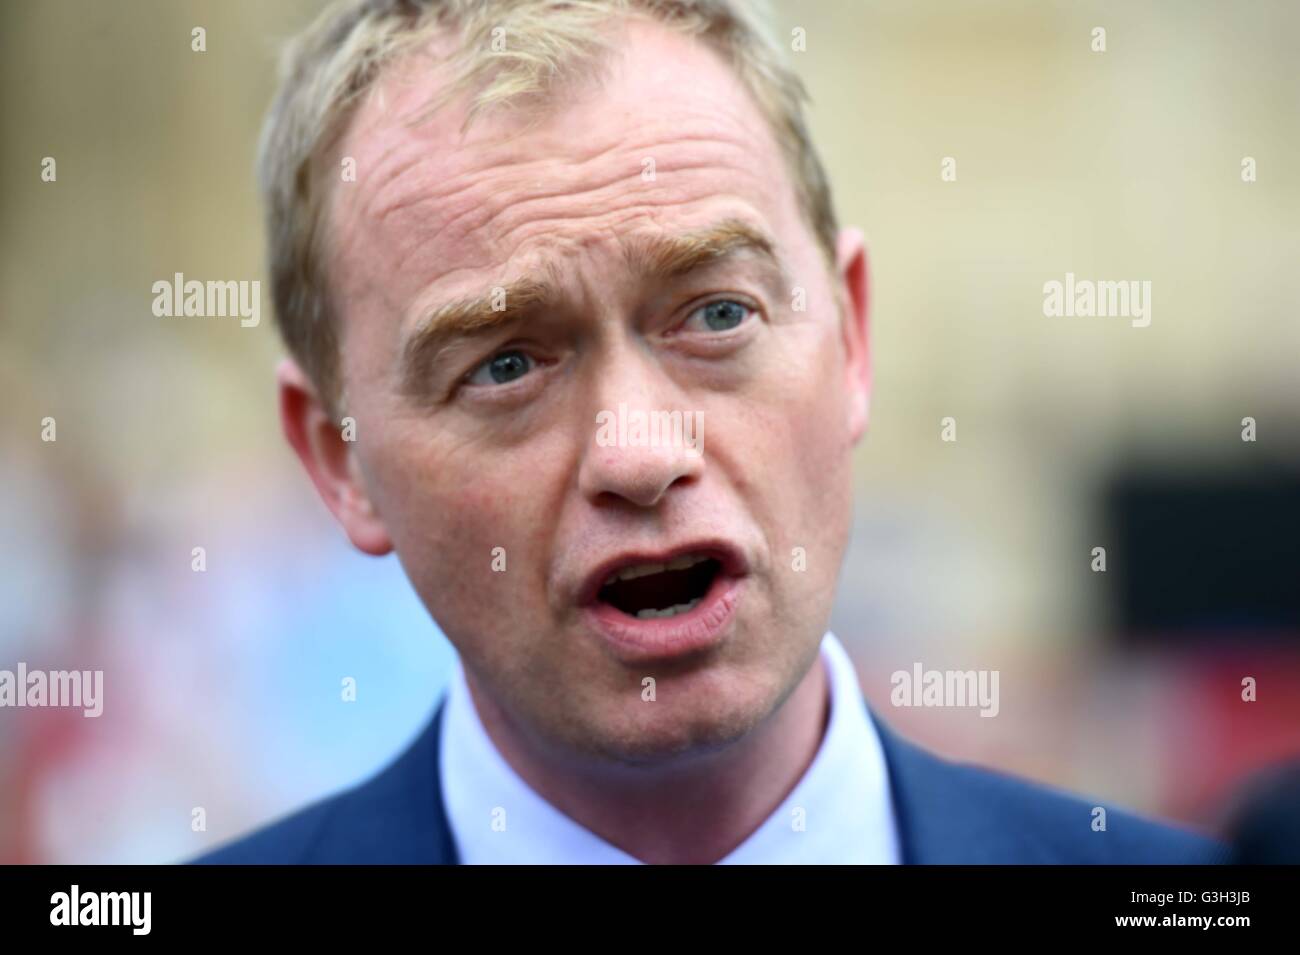 Tim Farron MP, Leader of the Liberal Democrats, on EU Referendum result day at College Green, London UK Stock Photo